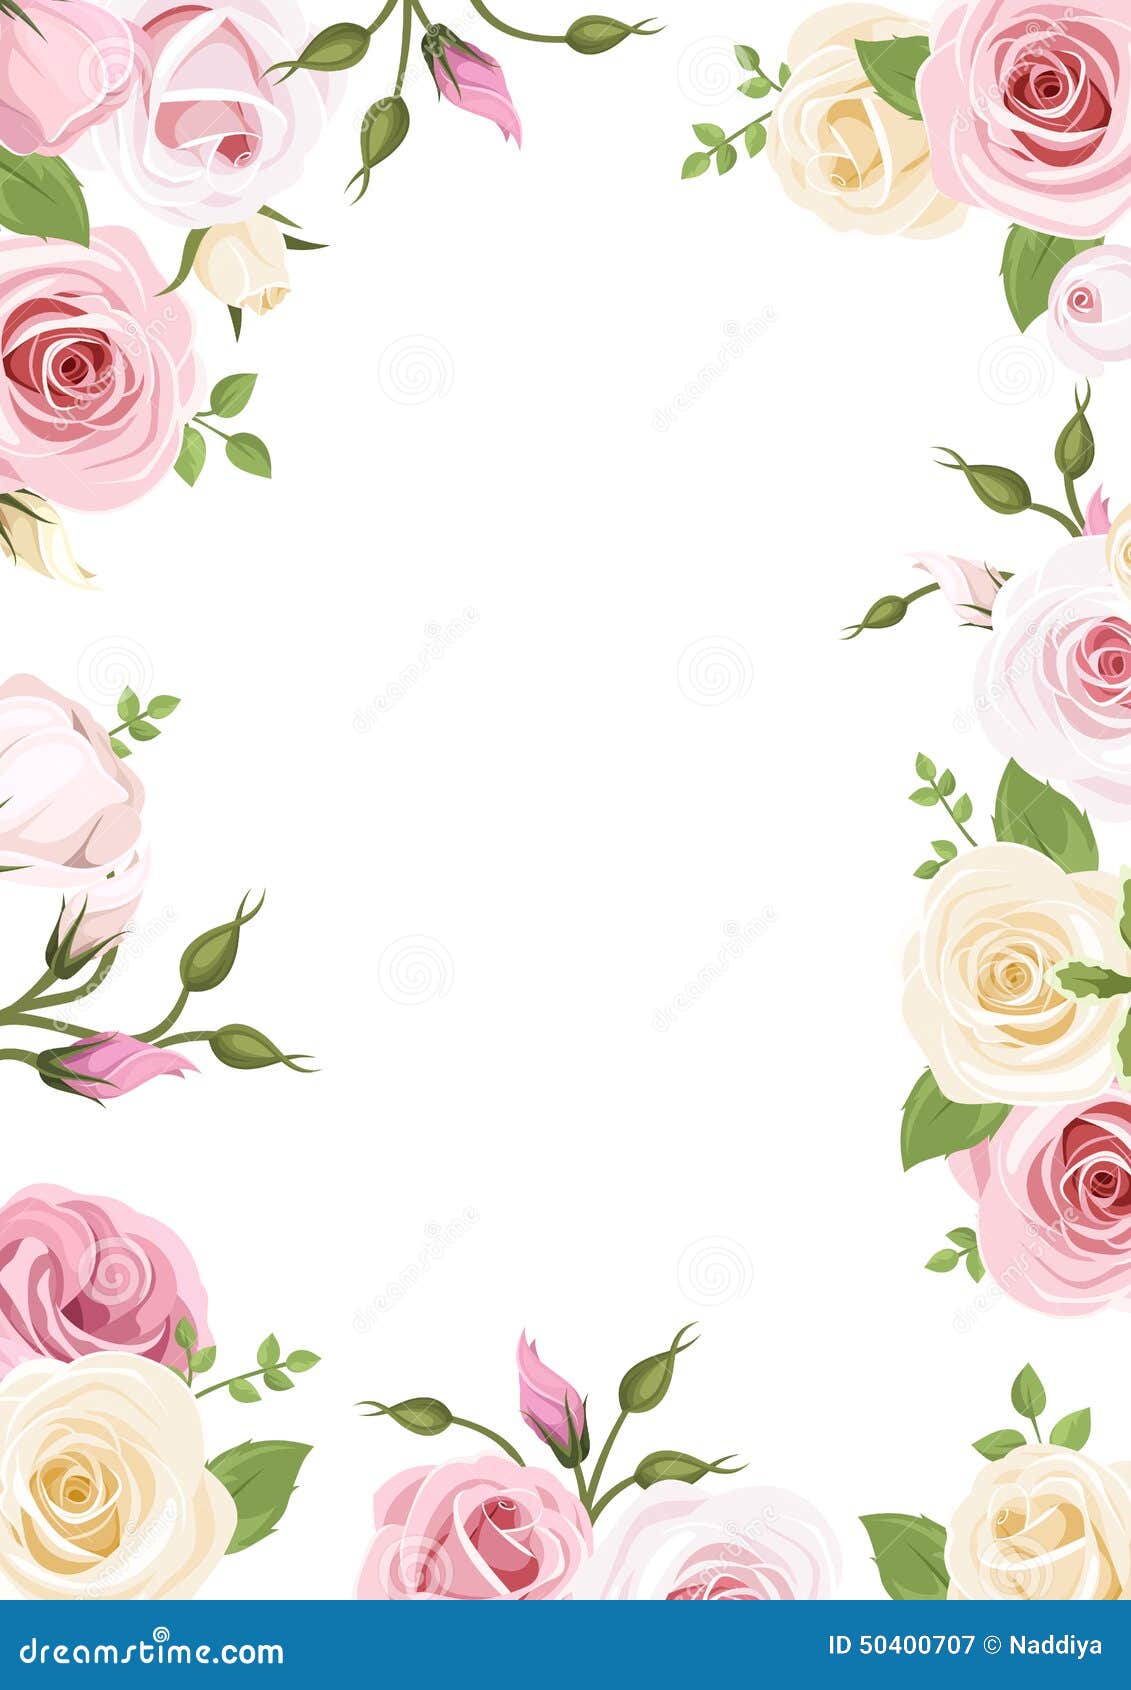 background with pink and white roses and lisianthus flowers.  .